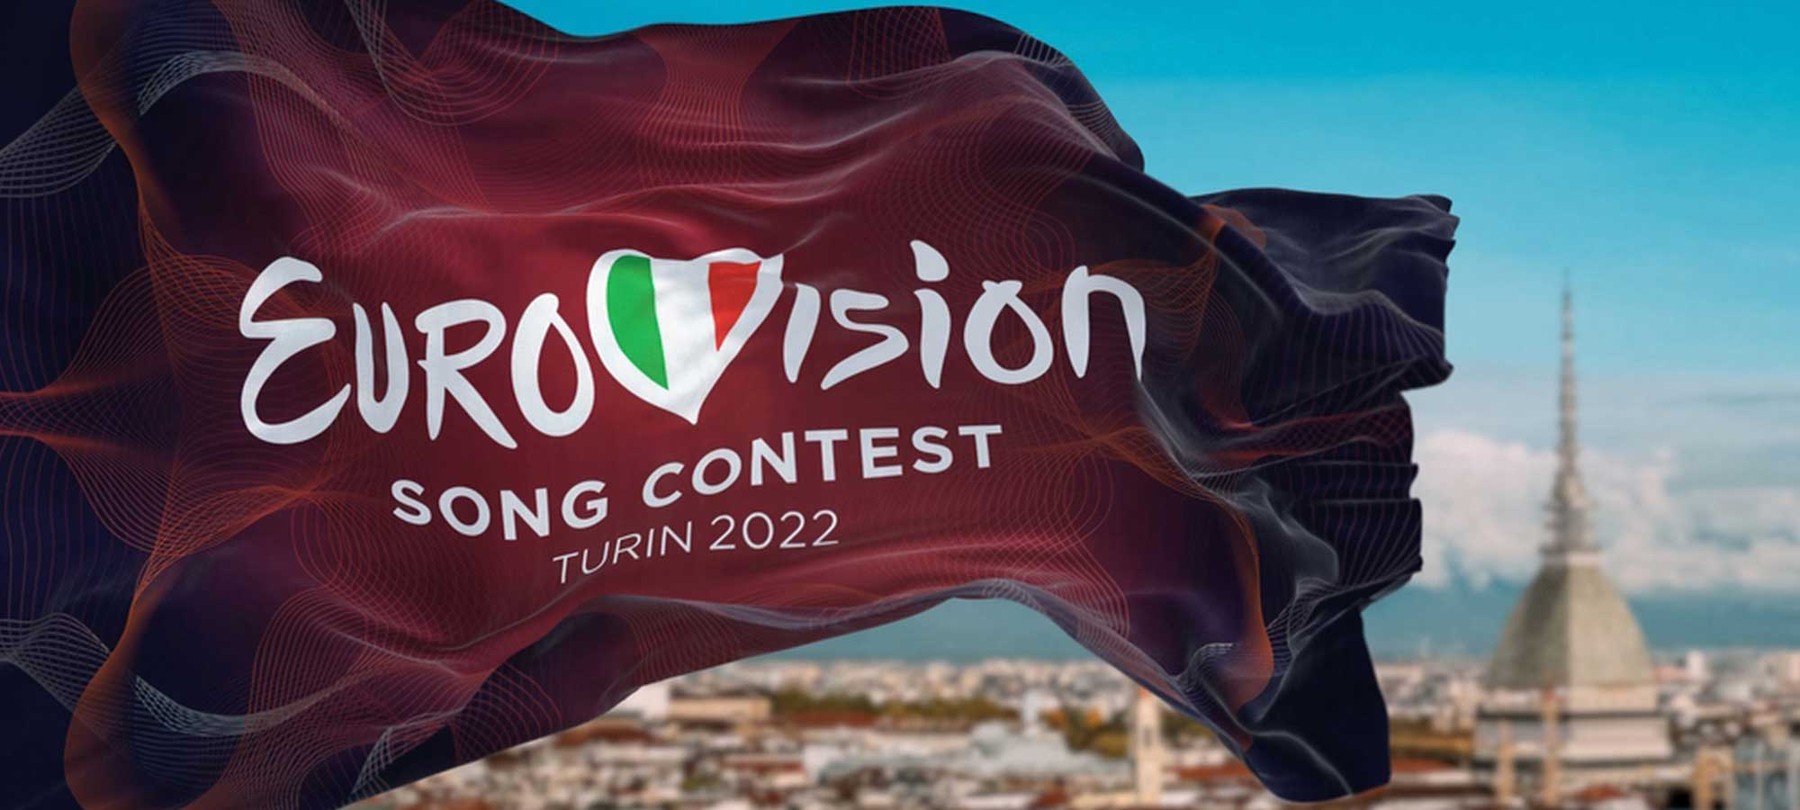 A graphic design that shows a dark red flag waving, with the logo of Eurovision and the text "Song content, Turin 2022" underneath it